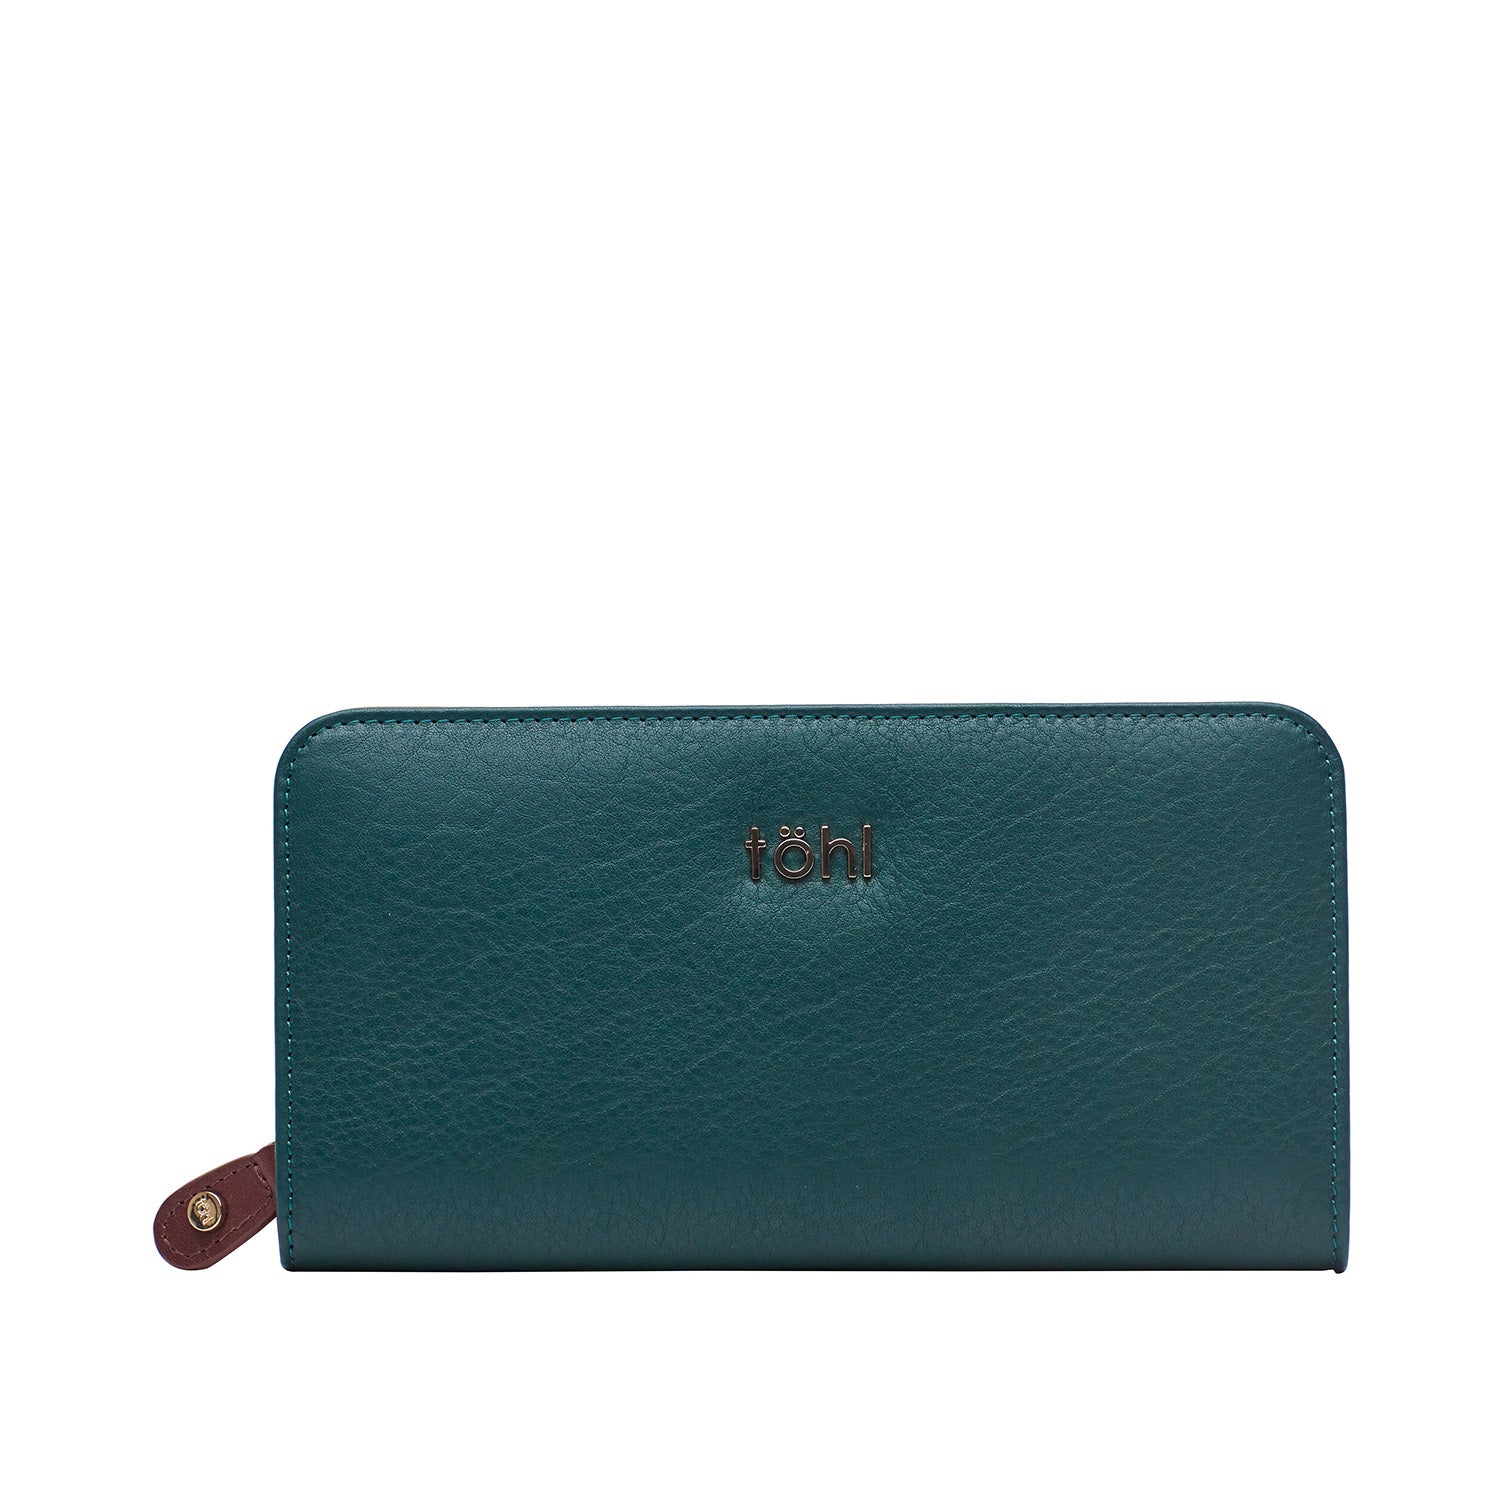 EmeraldEssence Women's Wallet Stylish and Functional Green Wallets